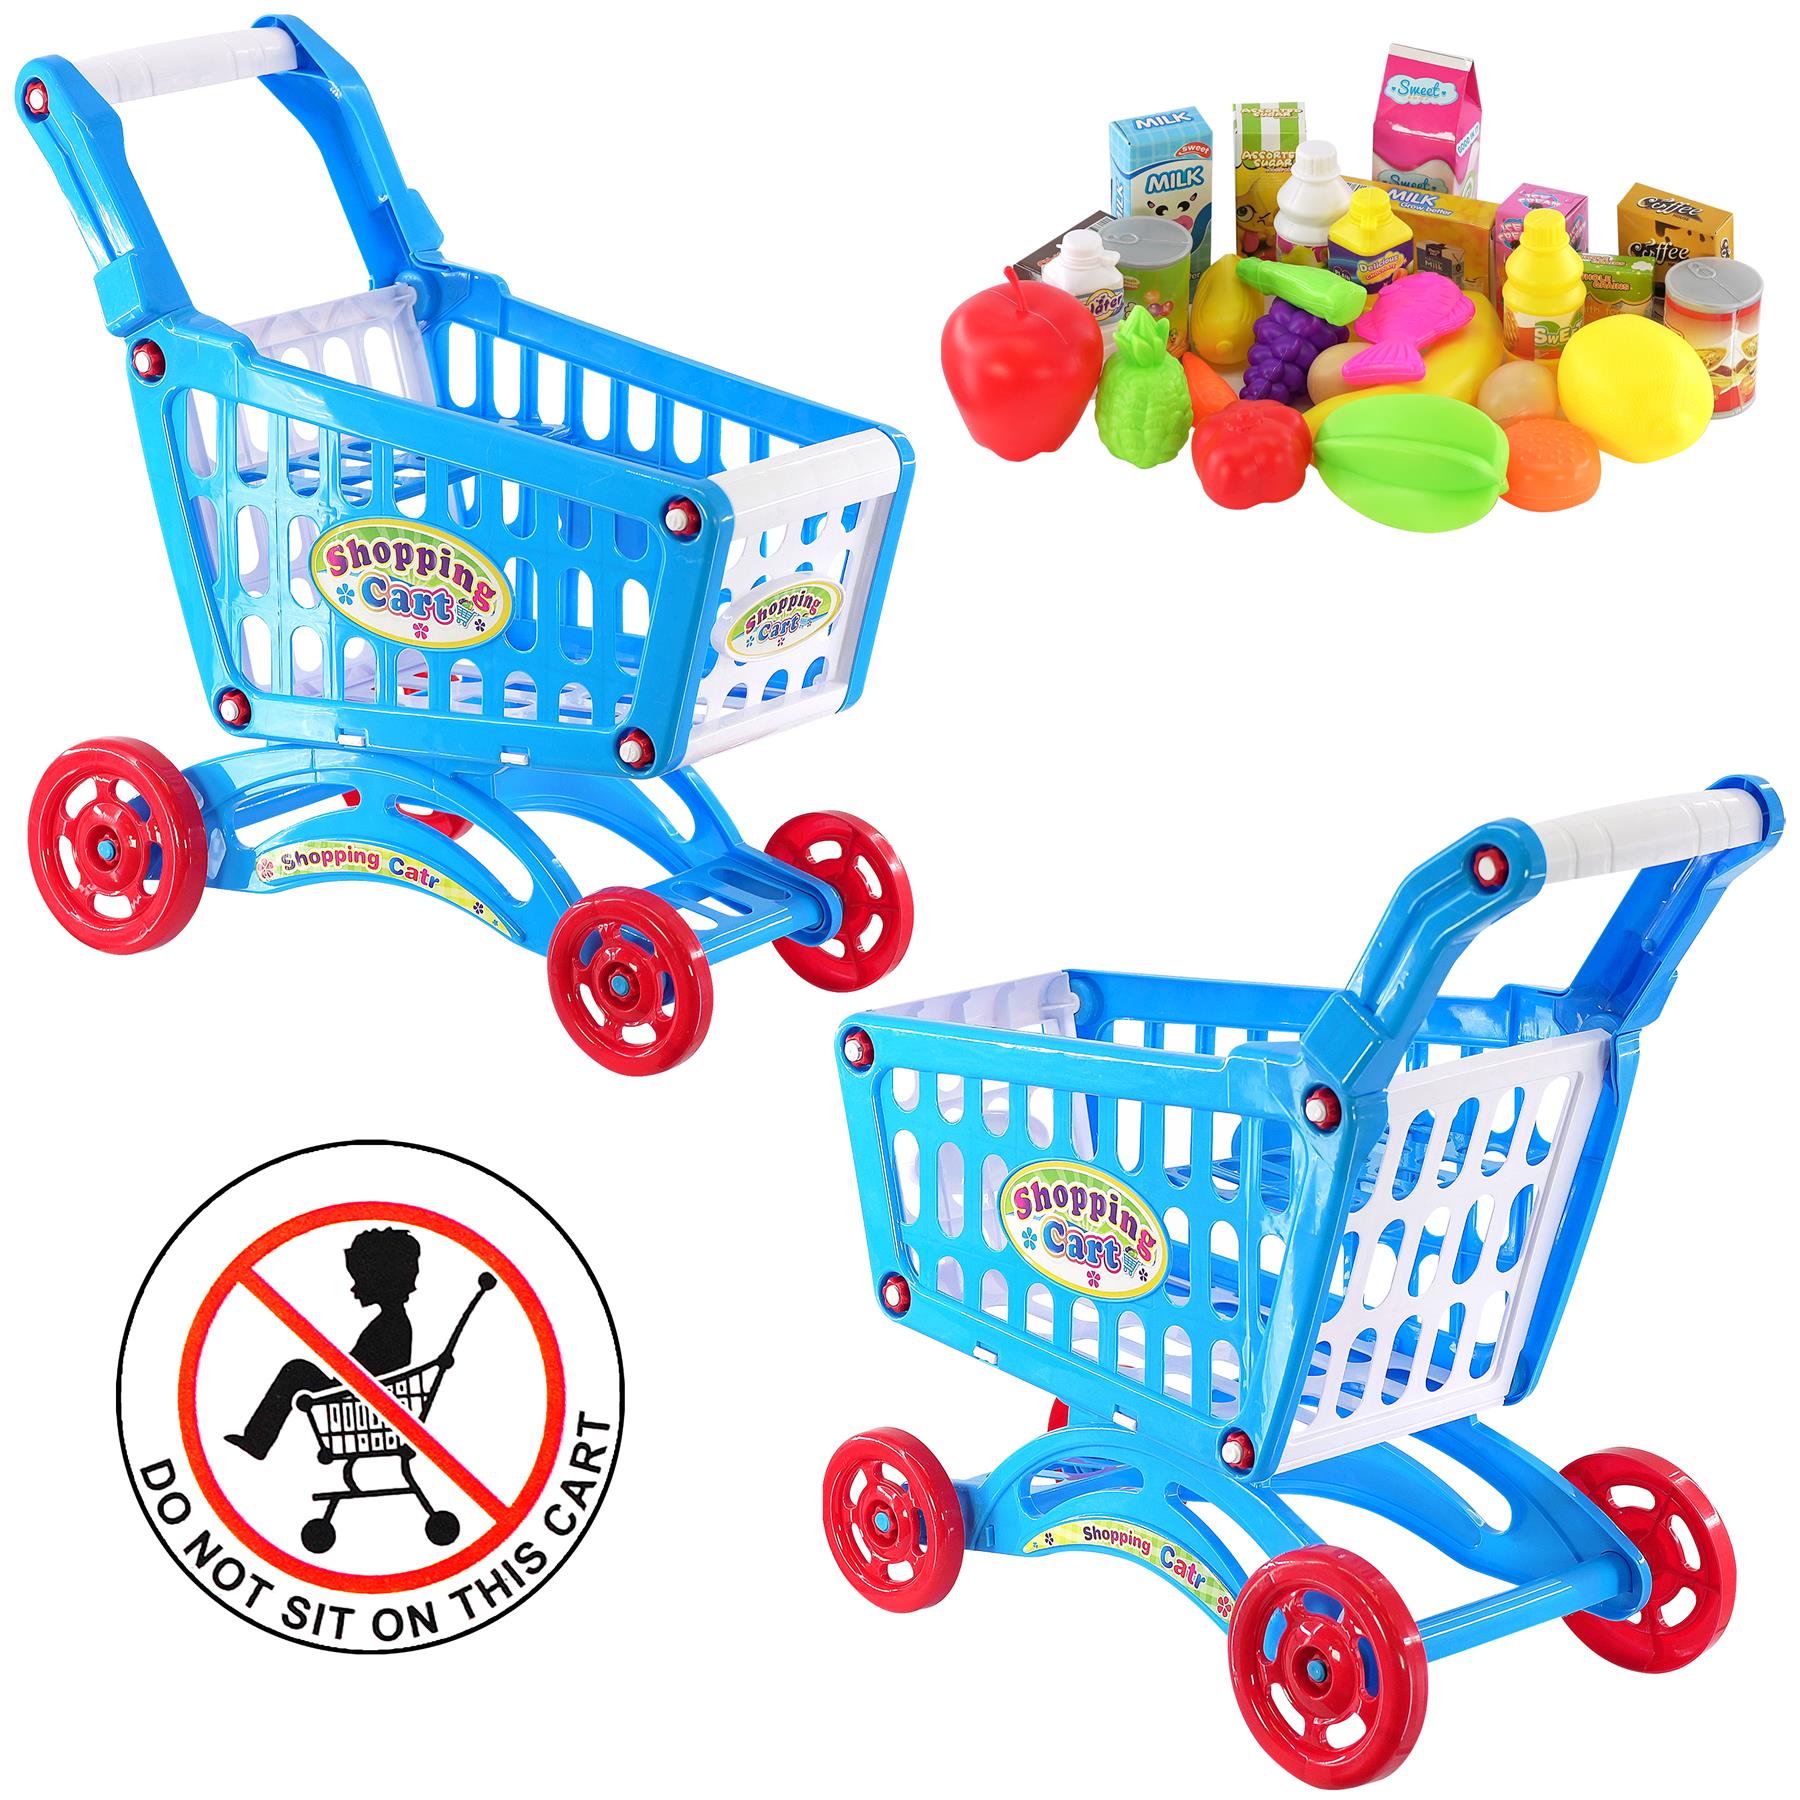 The Magic Toy Shop Activity Toy Blue Shopping Trolley Cart Play Food Set